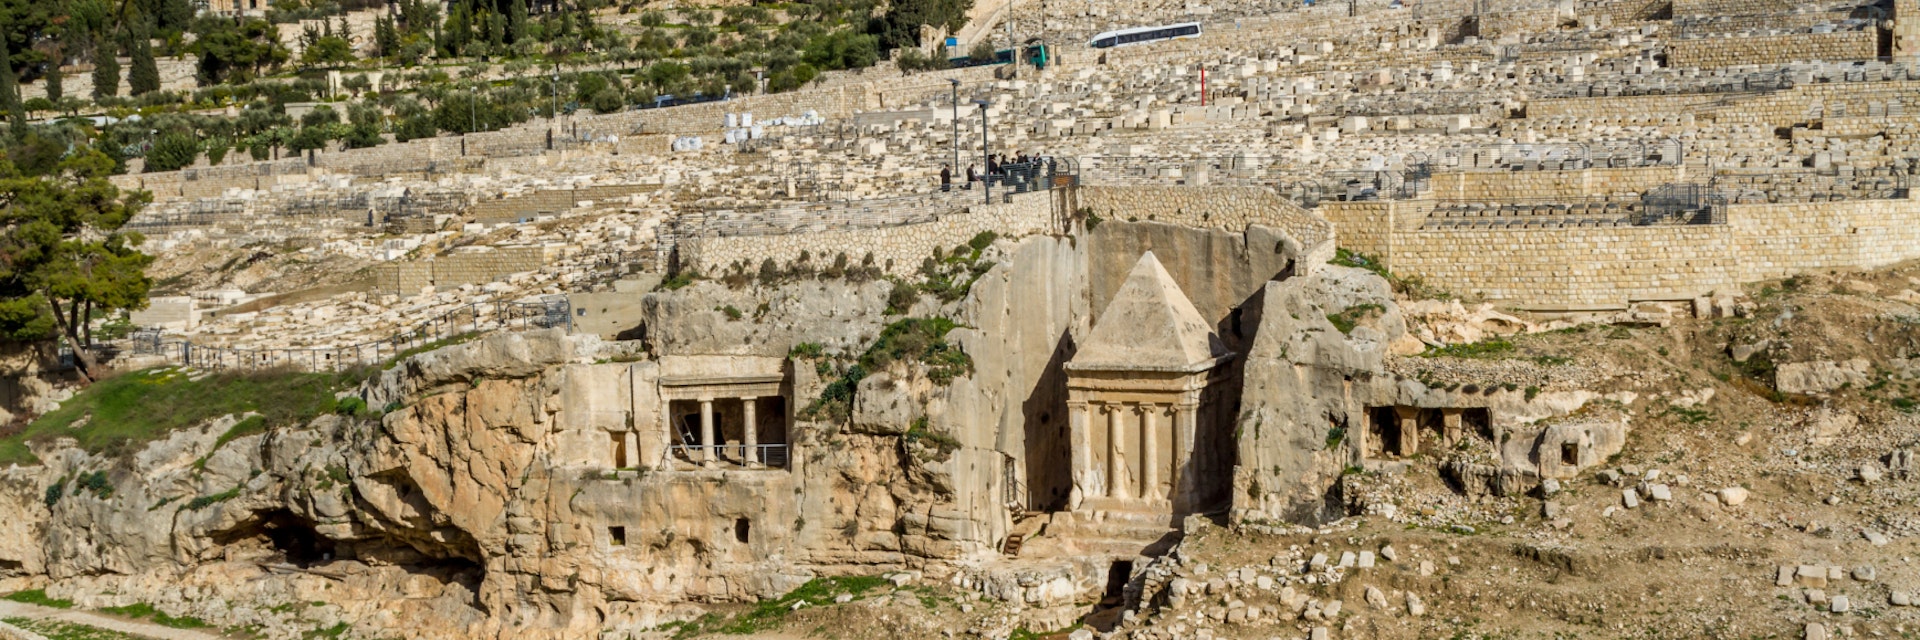 Kidron Valley or Kings Valley, Tomb of Zechariah near the Old City of Jerusalem; Shutterstock ID 390916243; Your name (First / Last): Lauren Keith; GL account no.: 65050; Netsuite department name: Online Editorial; Full Product or Project name including edition: Israel Update 2017